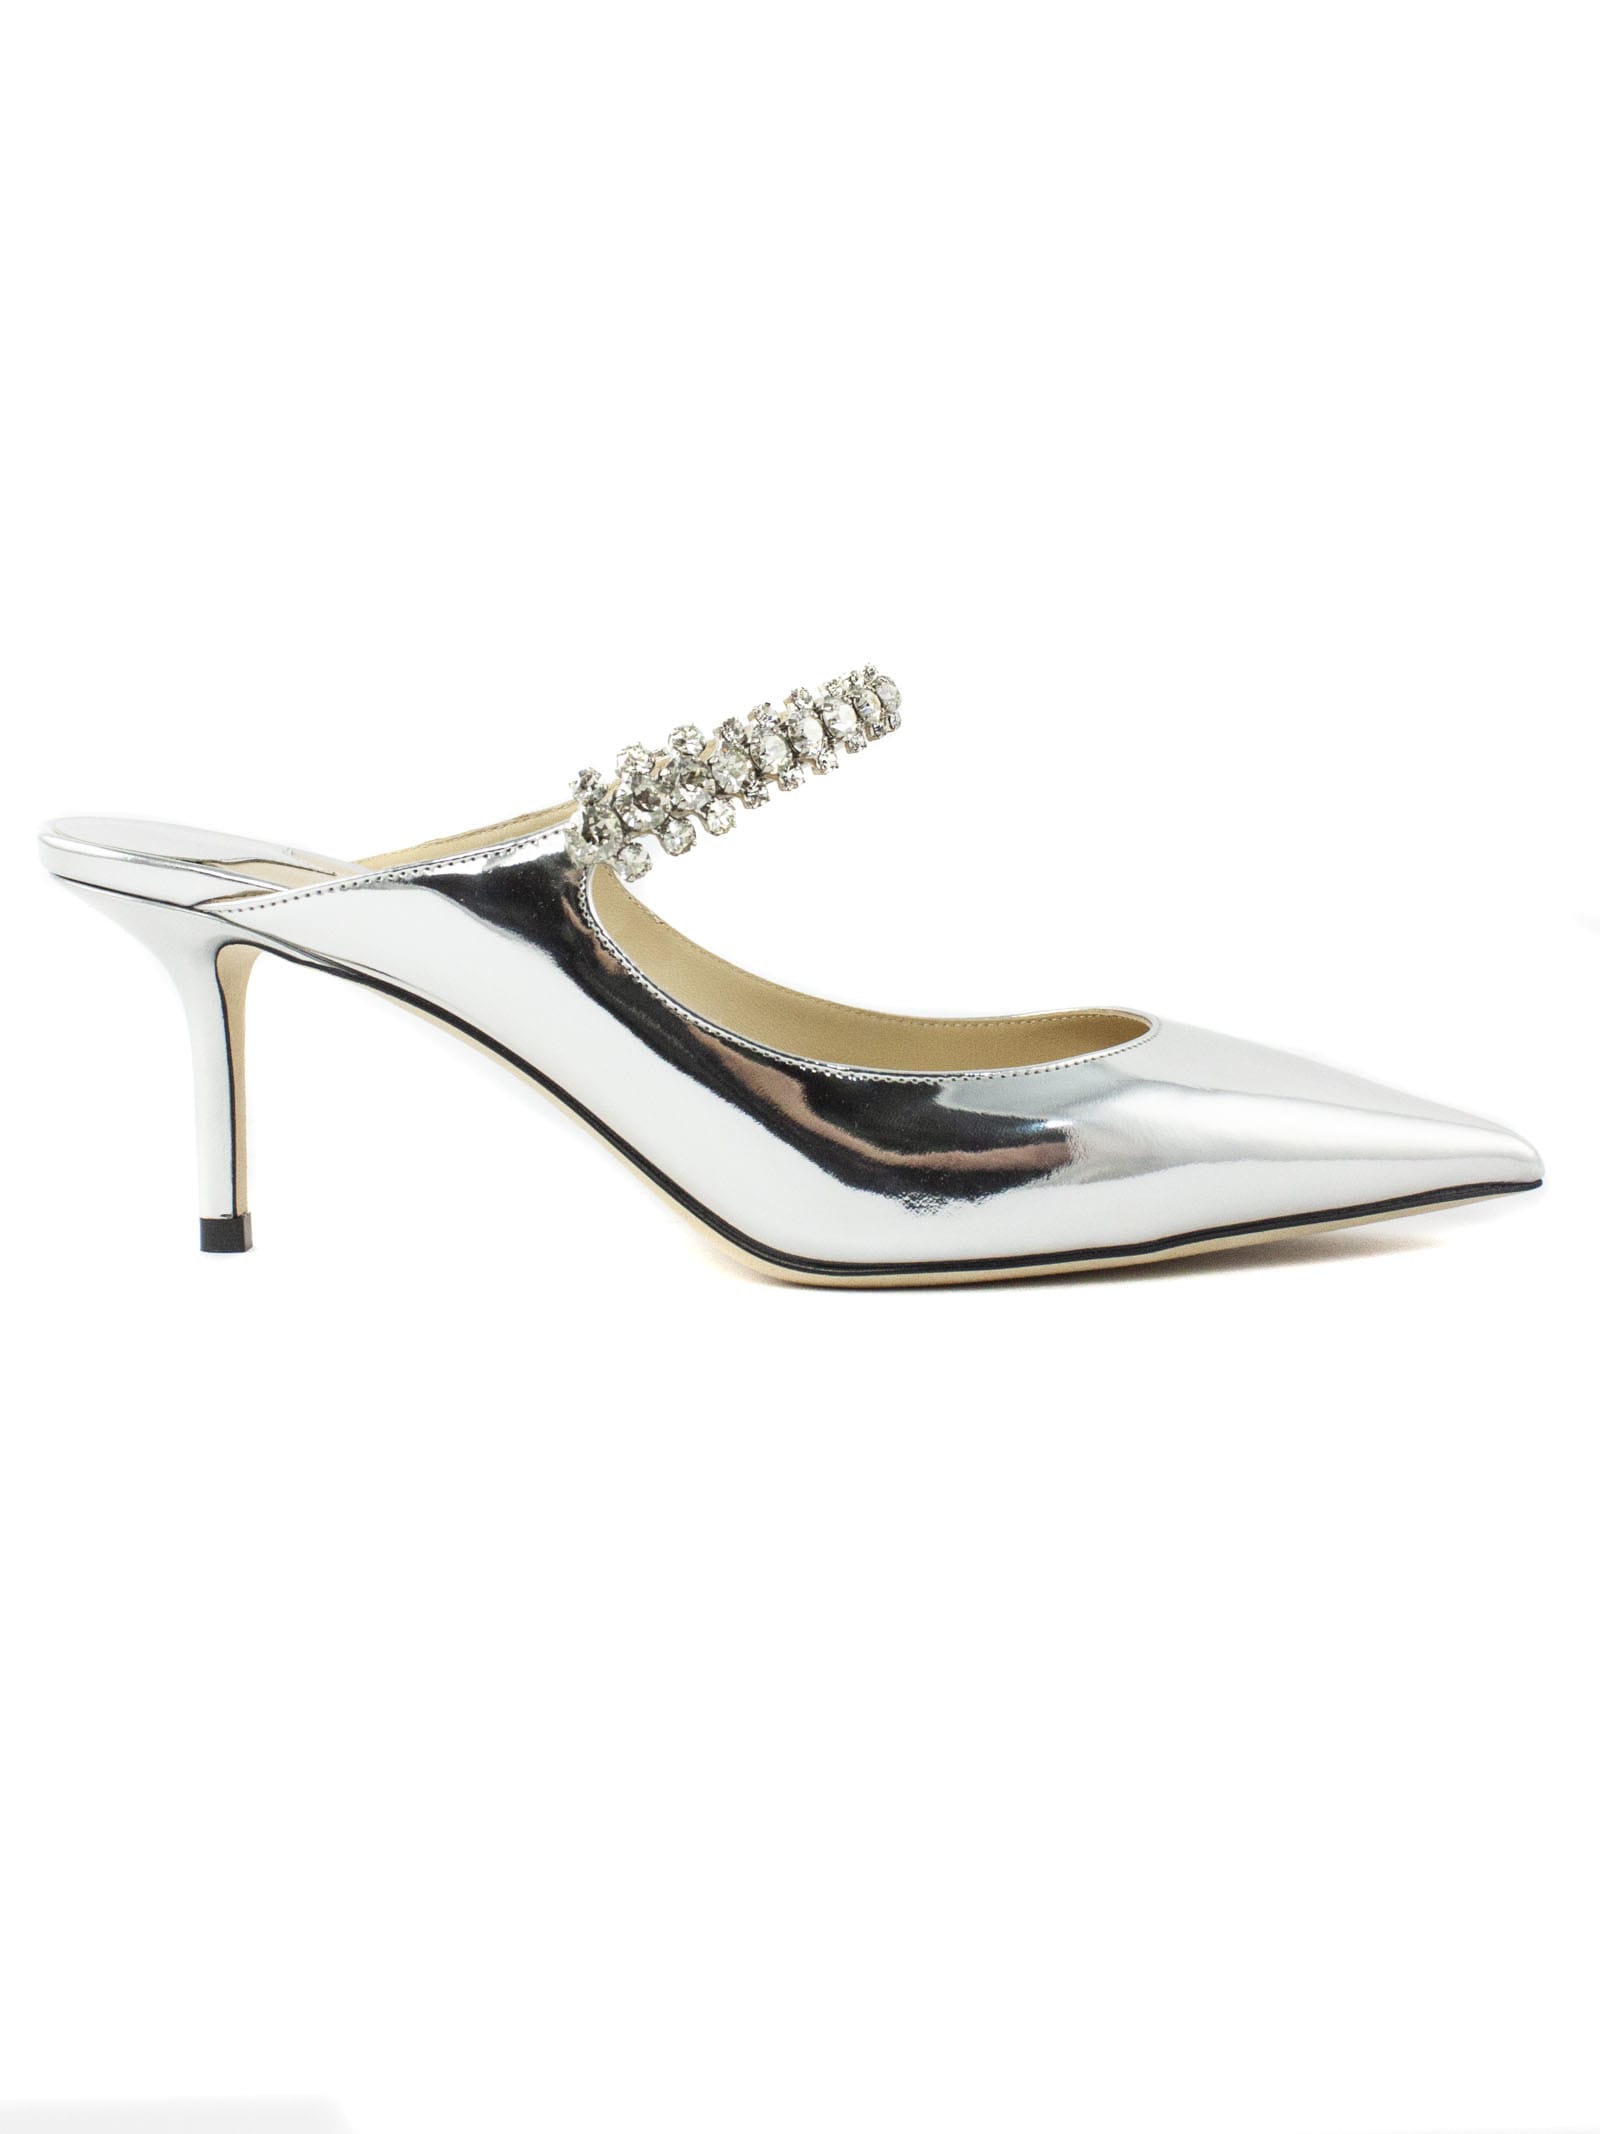 Buy Jimmy Choo Silver Patent Leather Mule online, shop Jimmy Choo shoes with free shipping